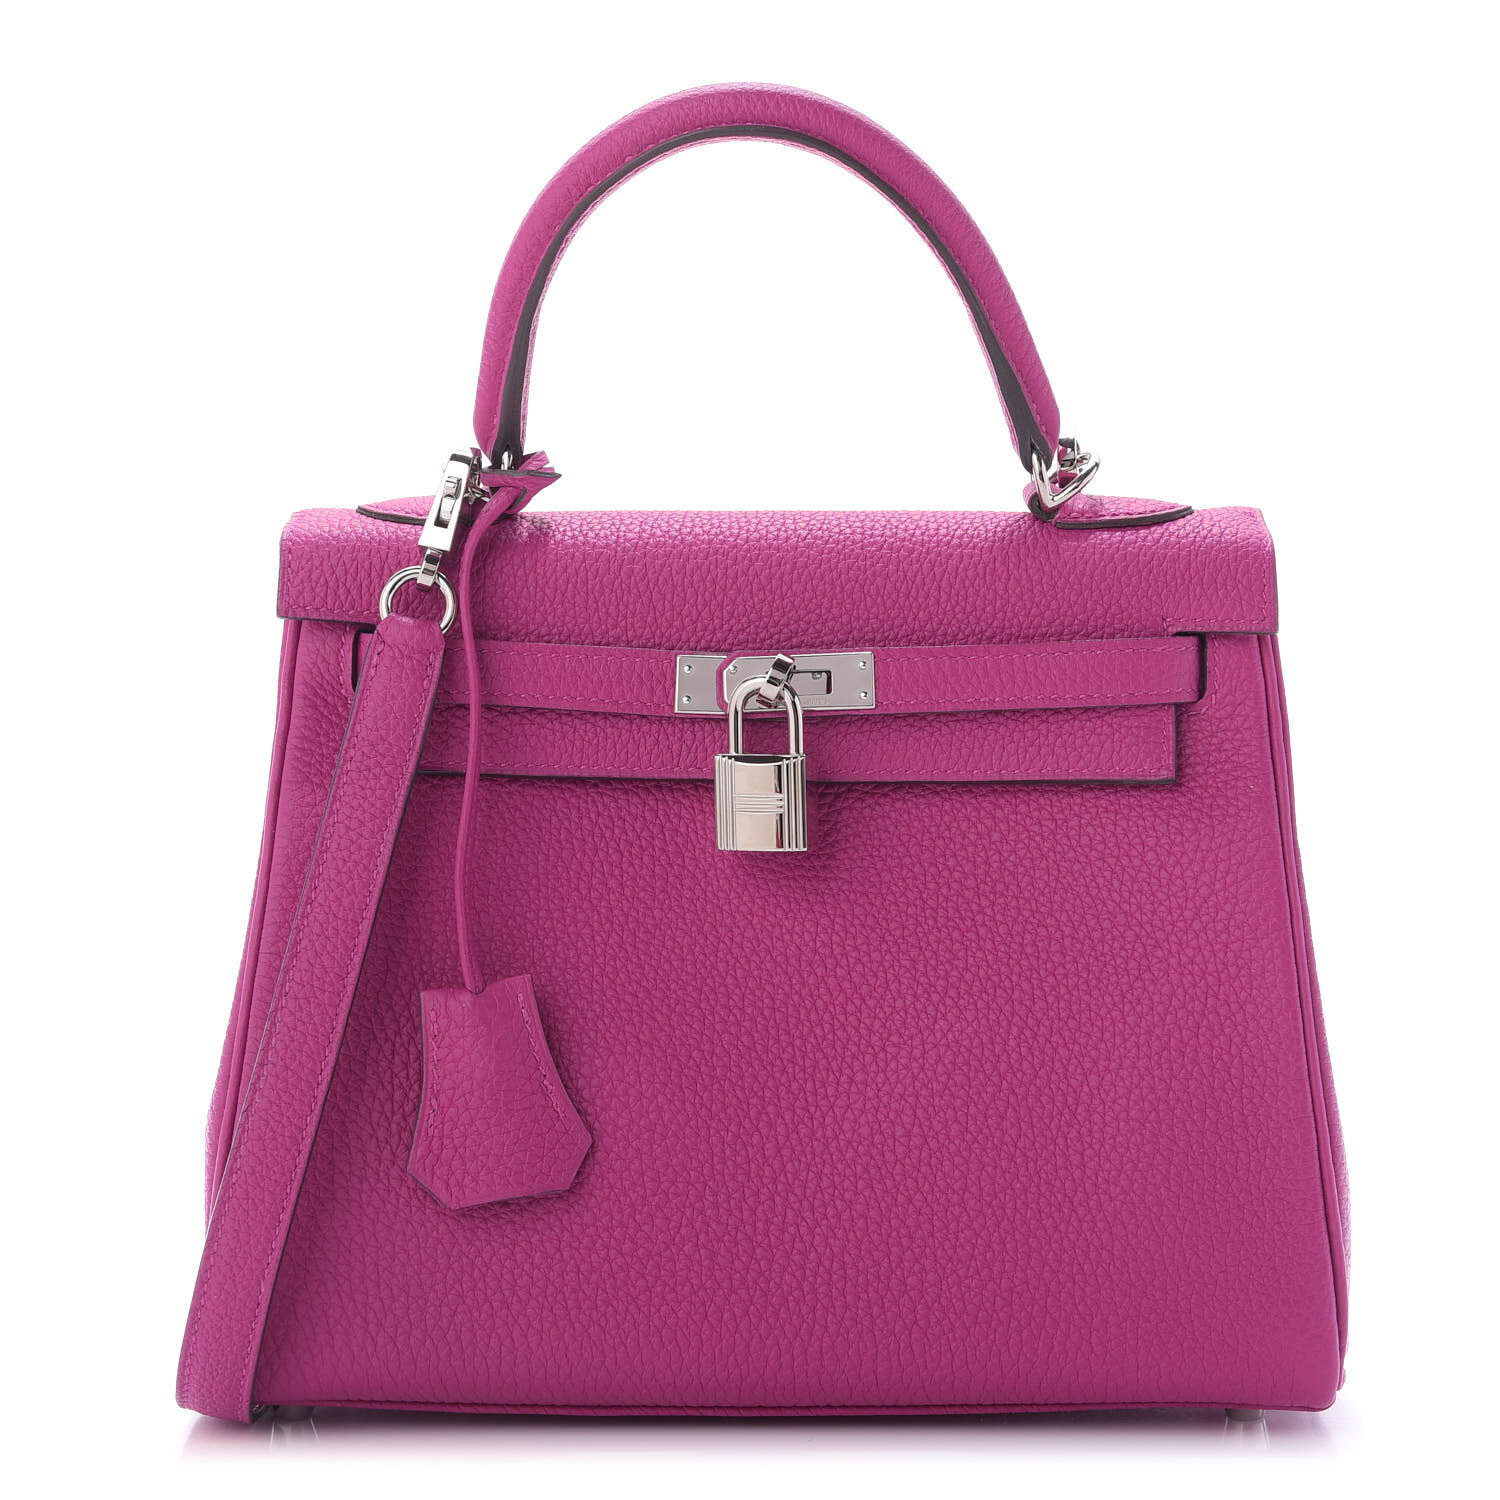 hermes-togo-kelly-retourne-25-rose-pourpre-available-for-sale-collectingluxury-1.jpg